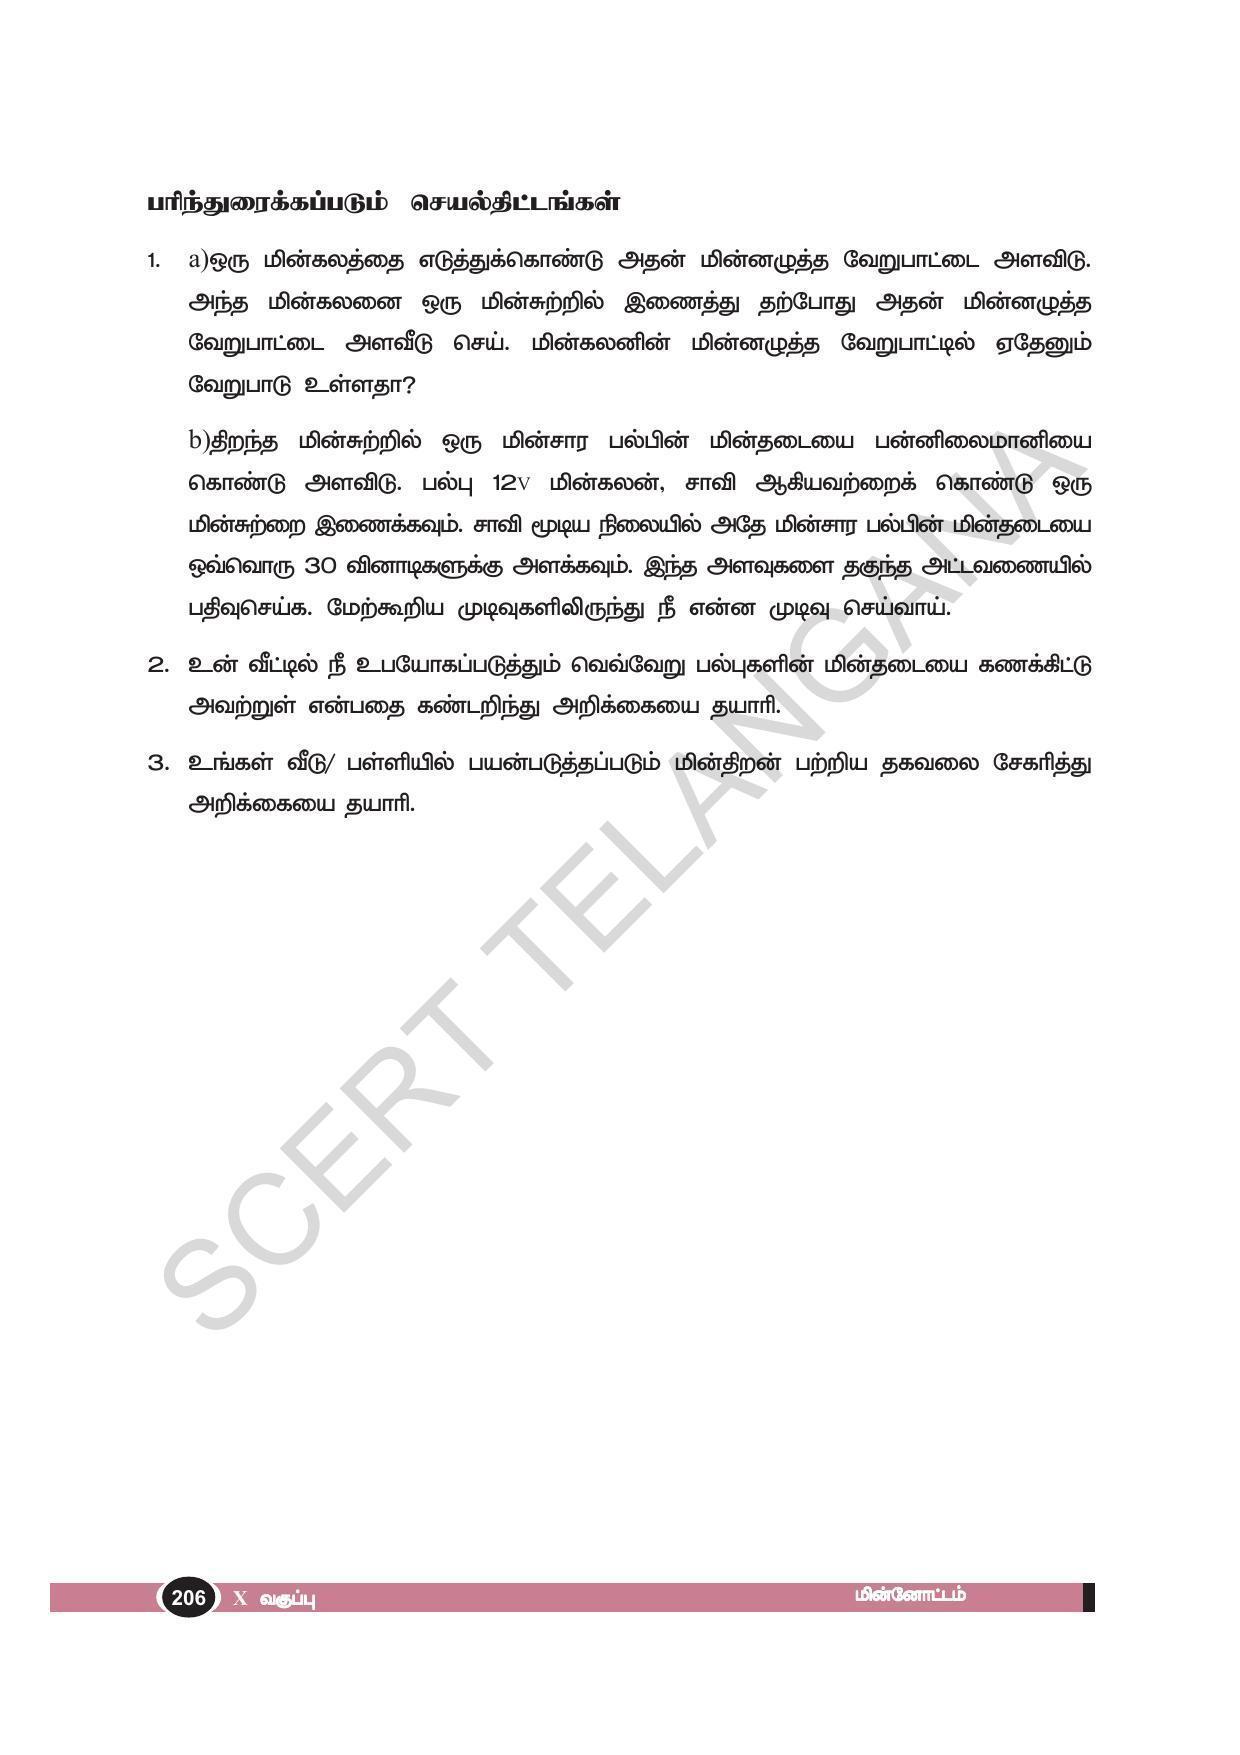 TS SCERT Class 10 Physical Science(Tamil Medium) Text Book - Page 218